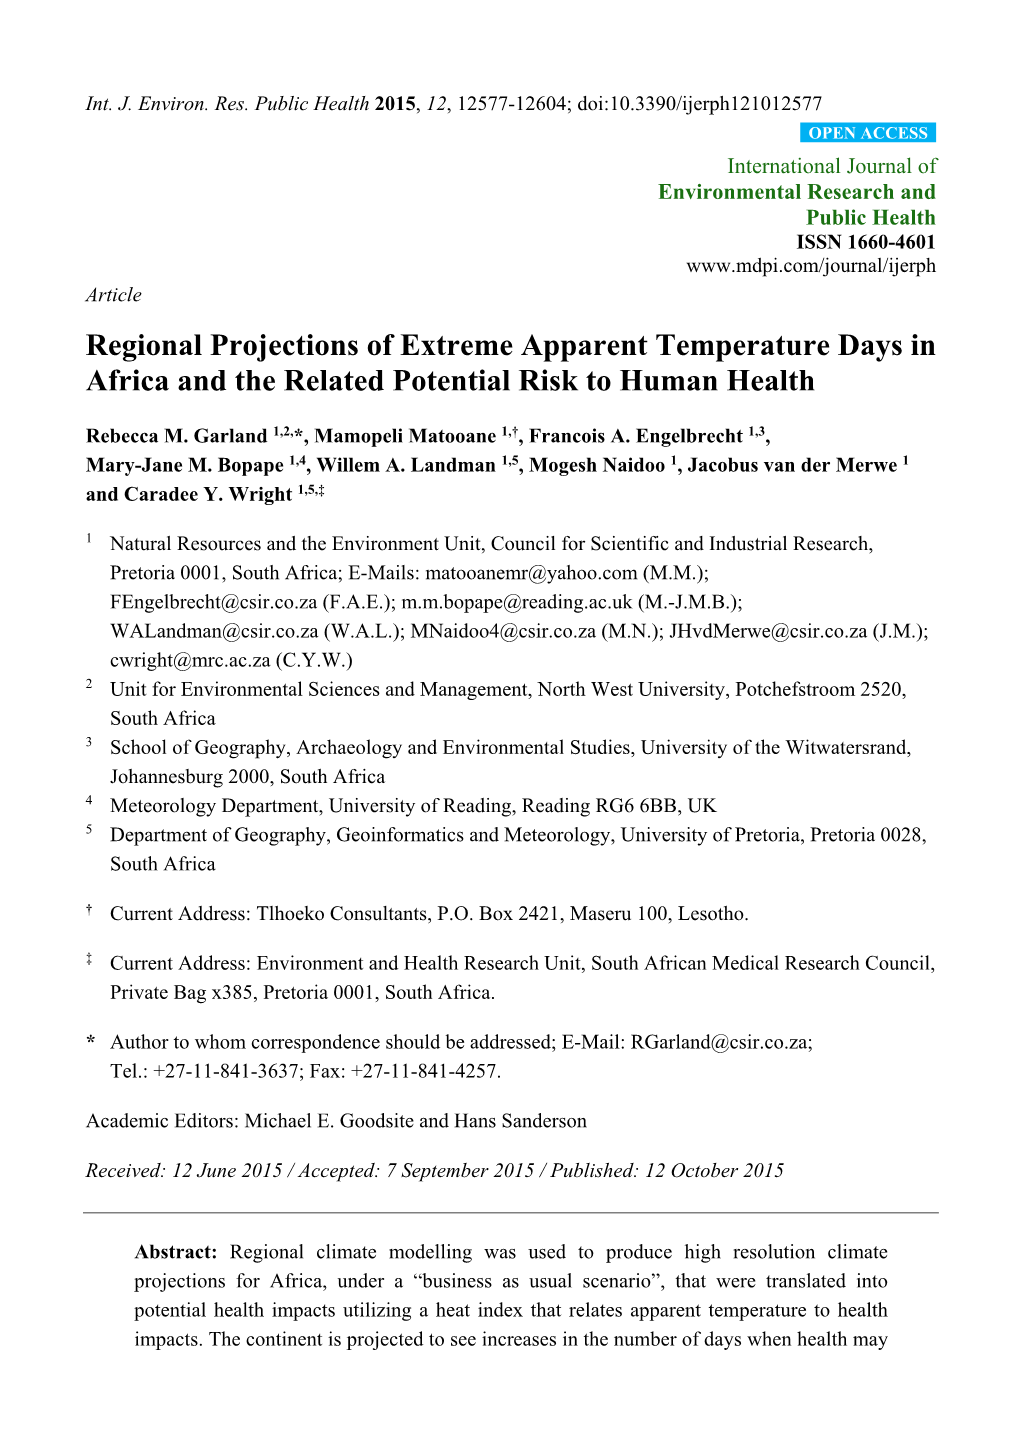 Regional Projections of Extreme Apparent Temperature Days in Africa and the Related Potential Risk to Human Health